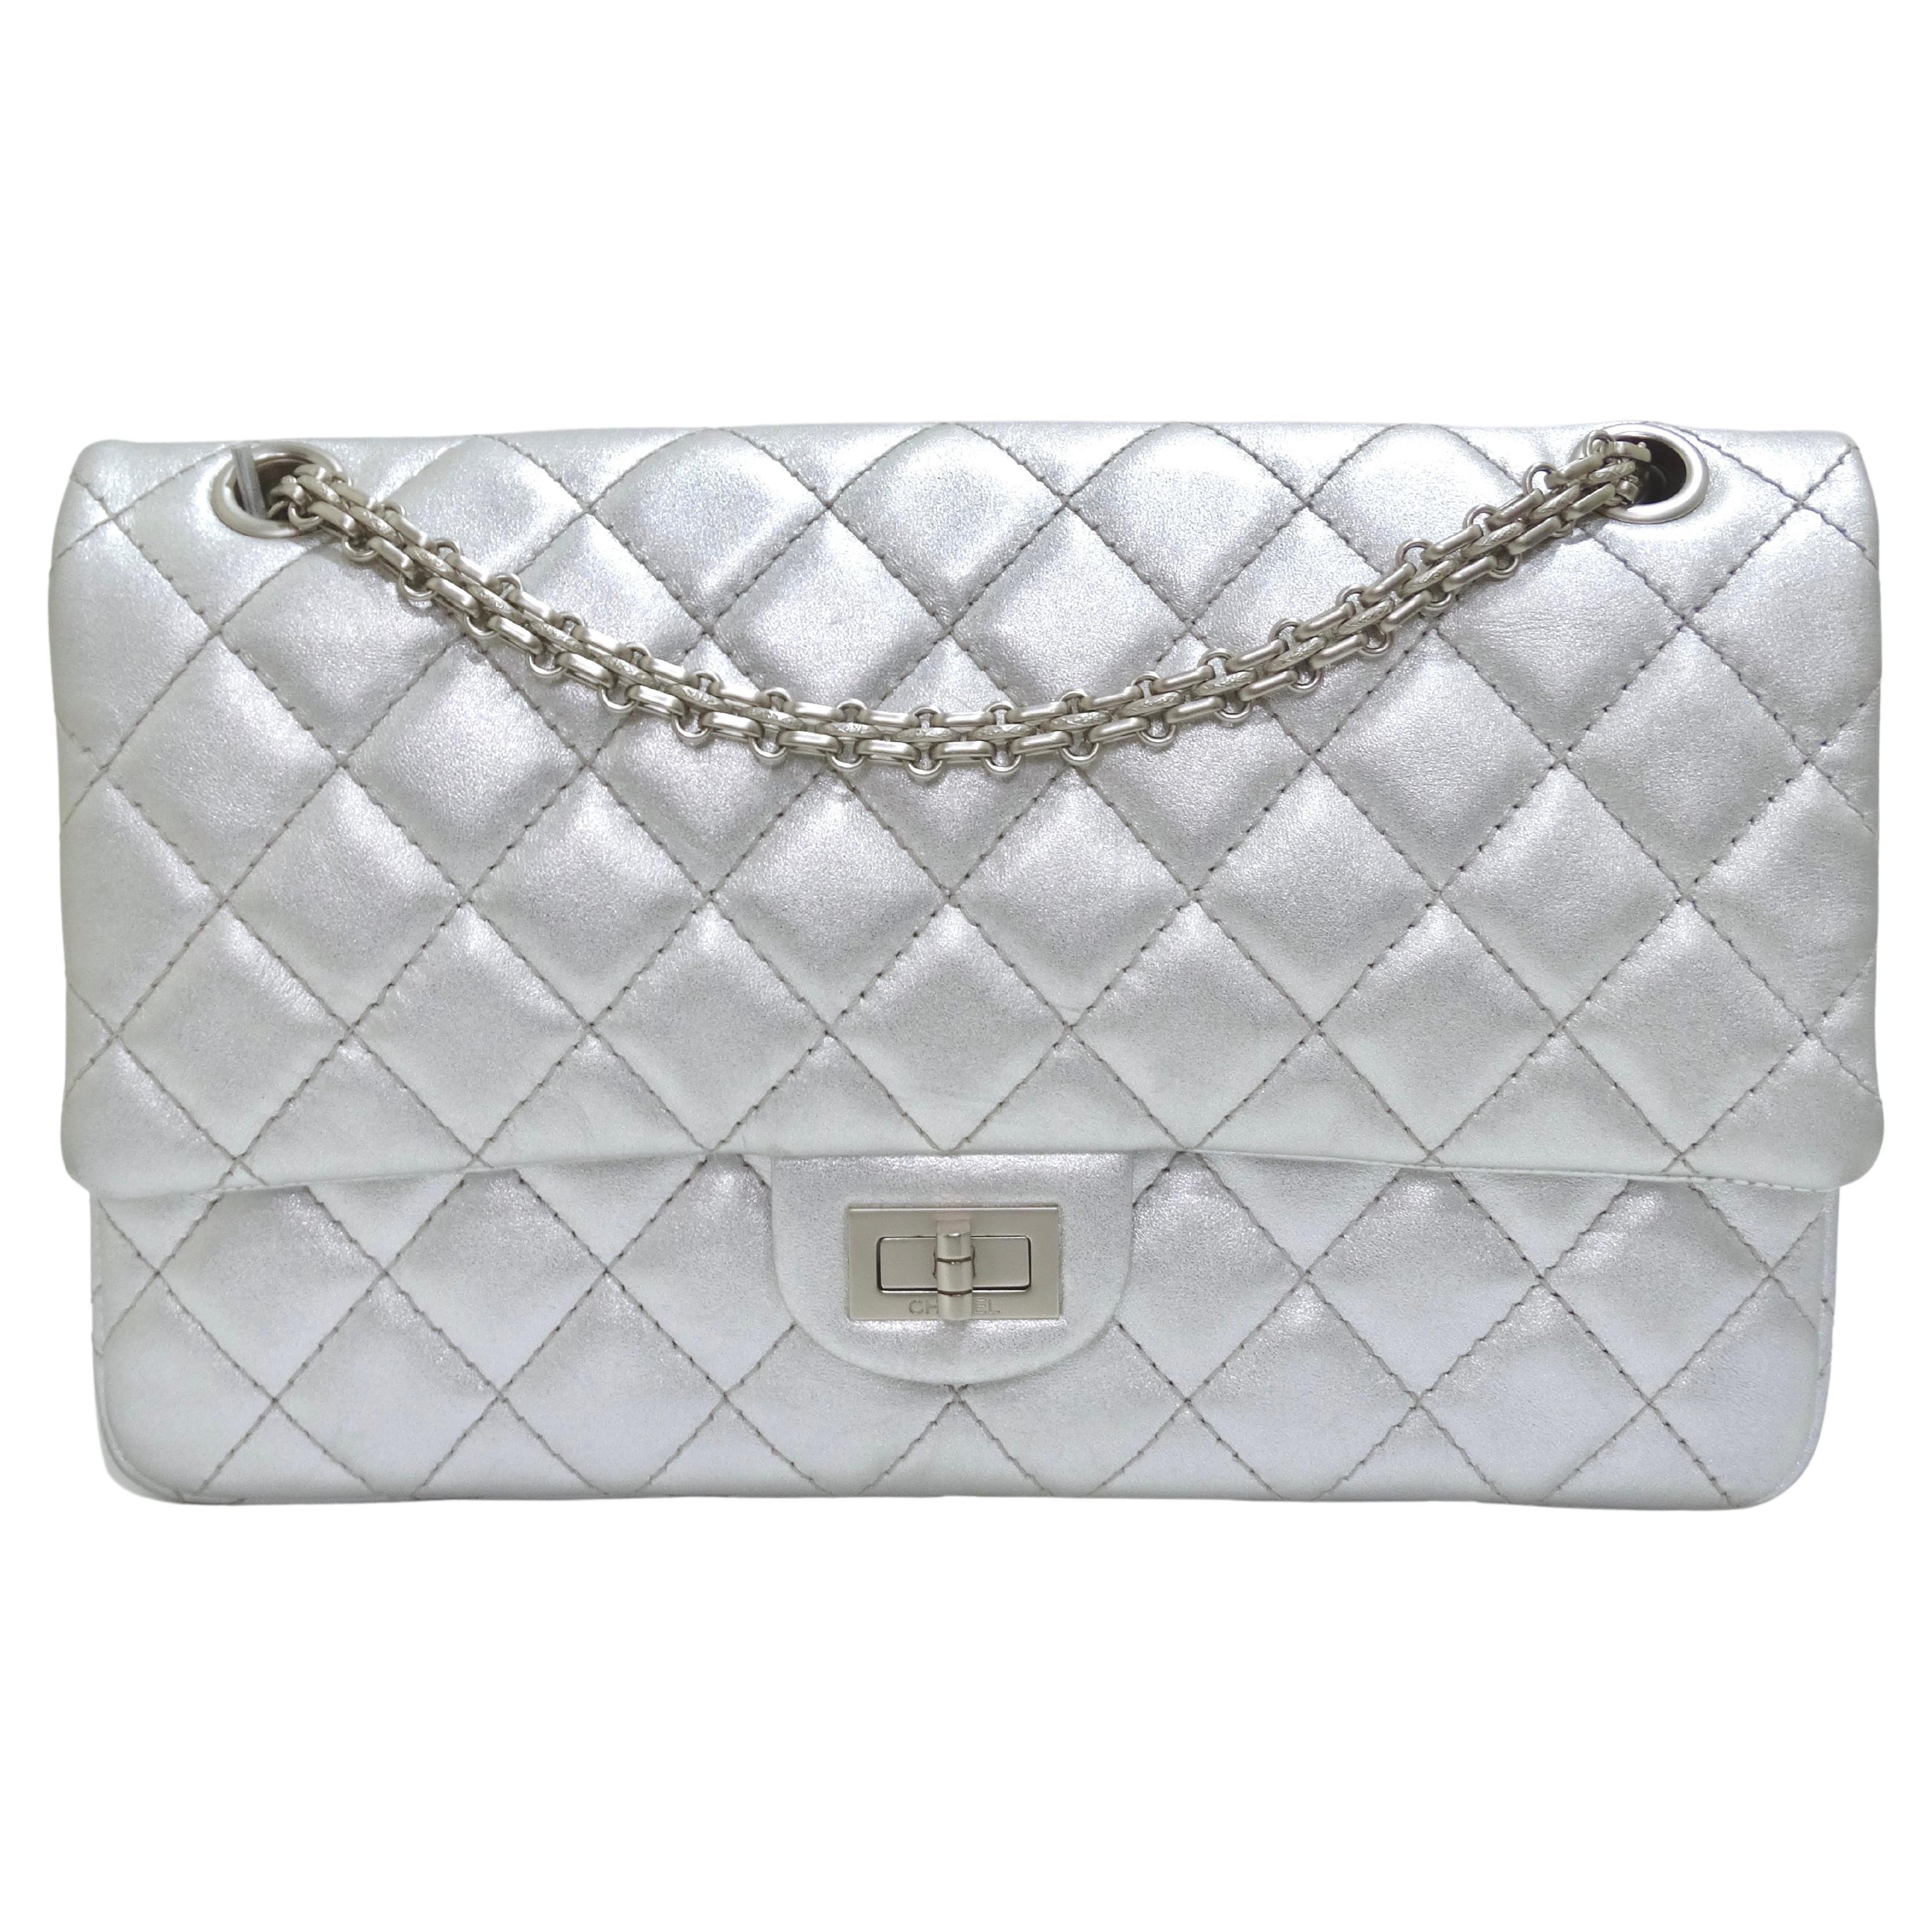 Chanel Metallic Calfskin Quilted 2.55 Reissue Jumbo Double Flap For Sale